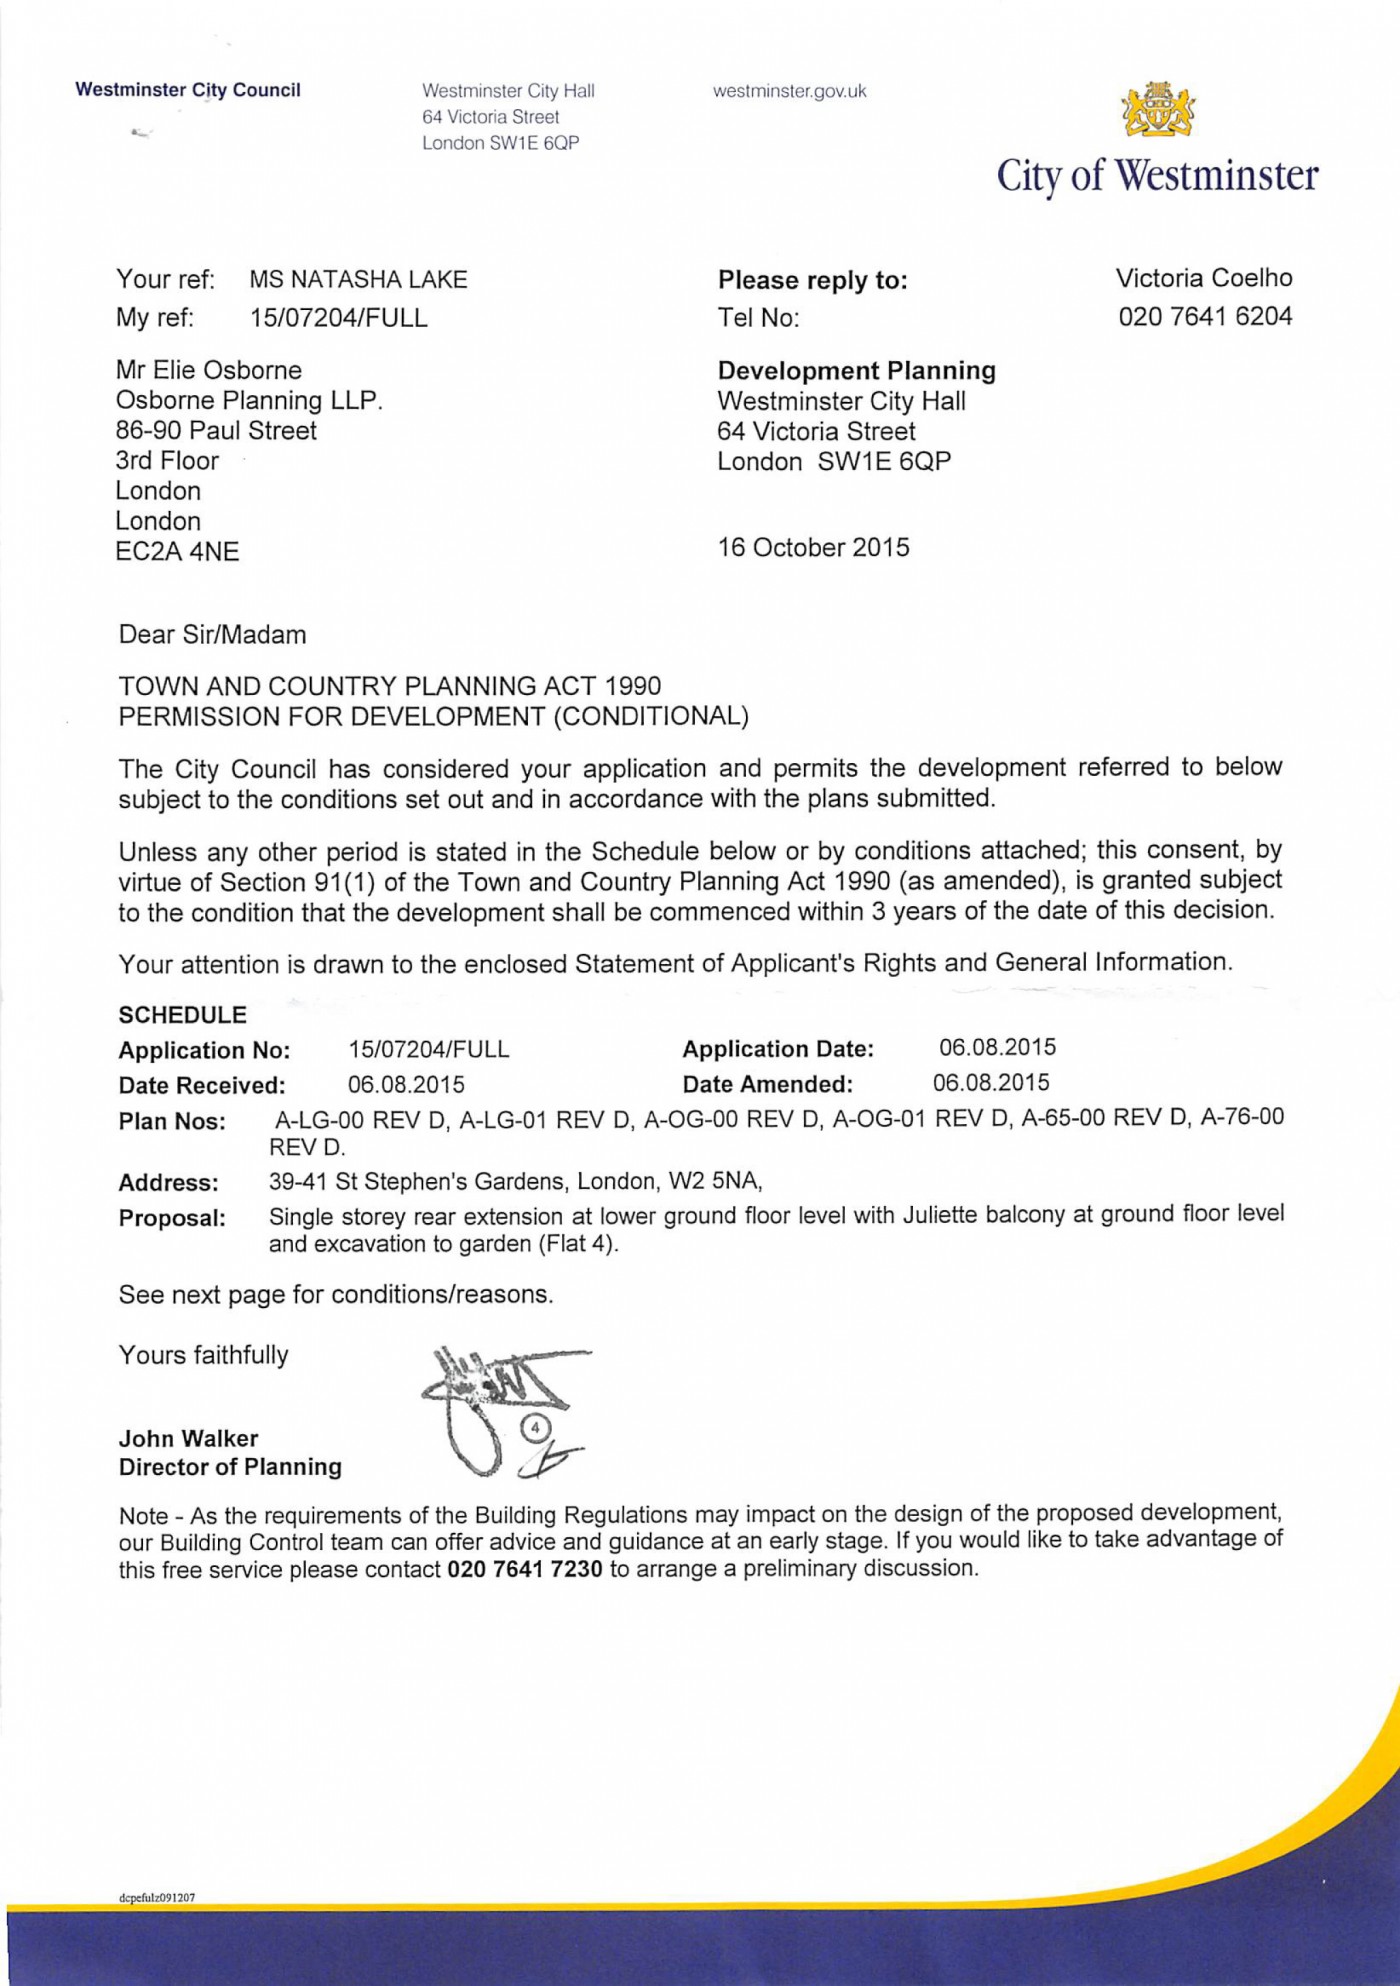 Decision Notice - Westminster Council Granted Permission